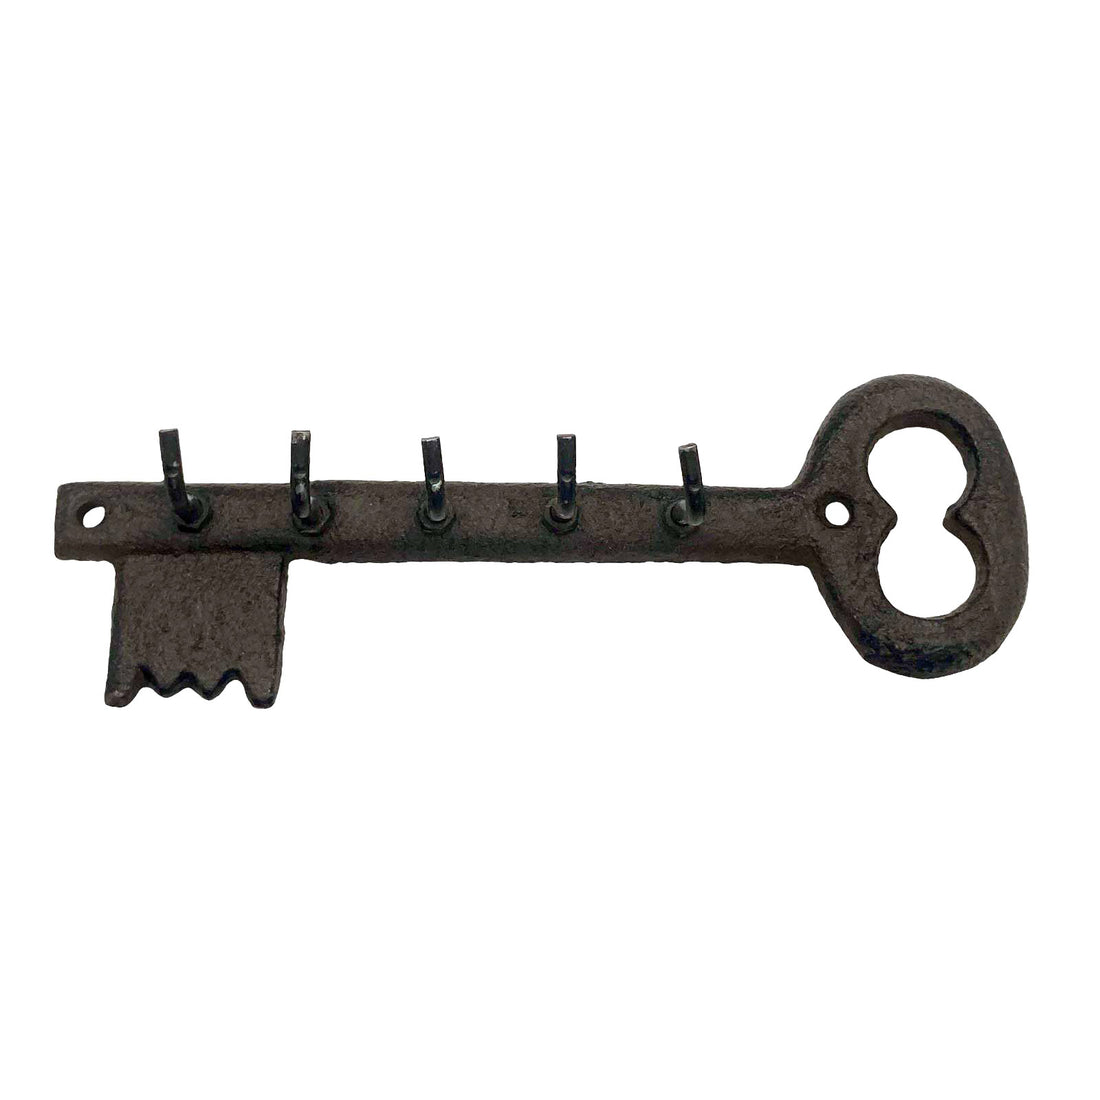 Cast Iron Small Antique Key Wall Hook